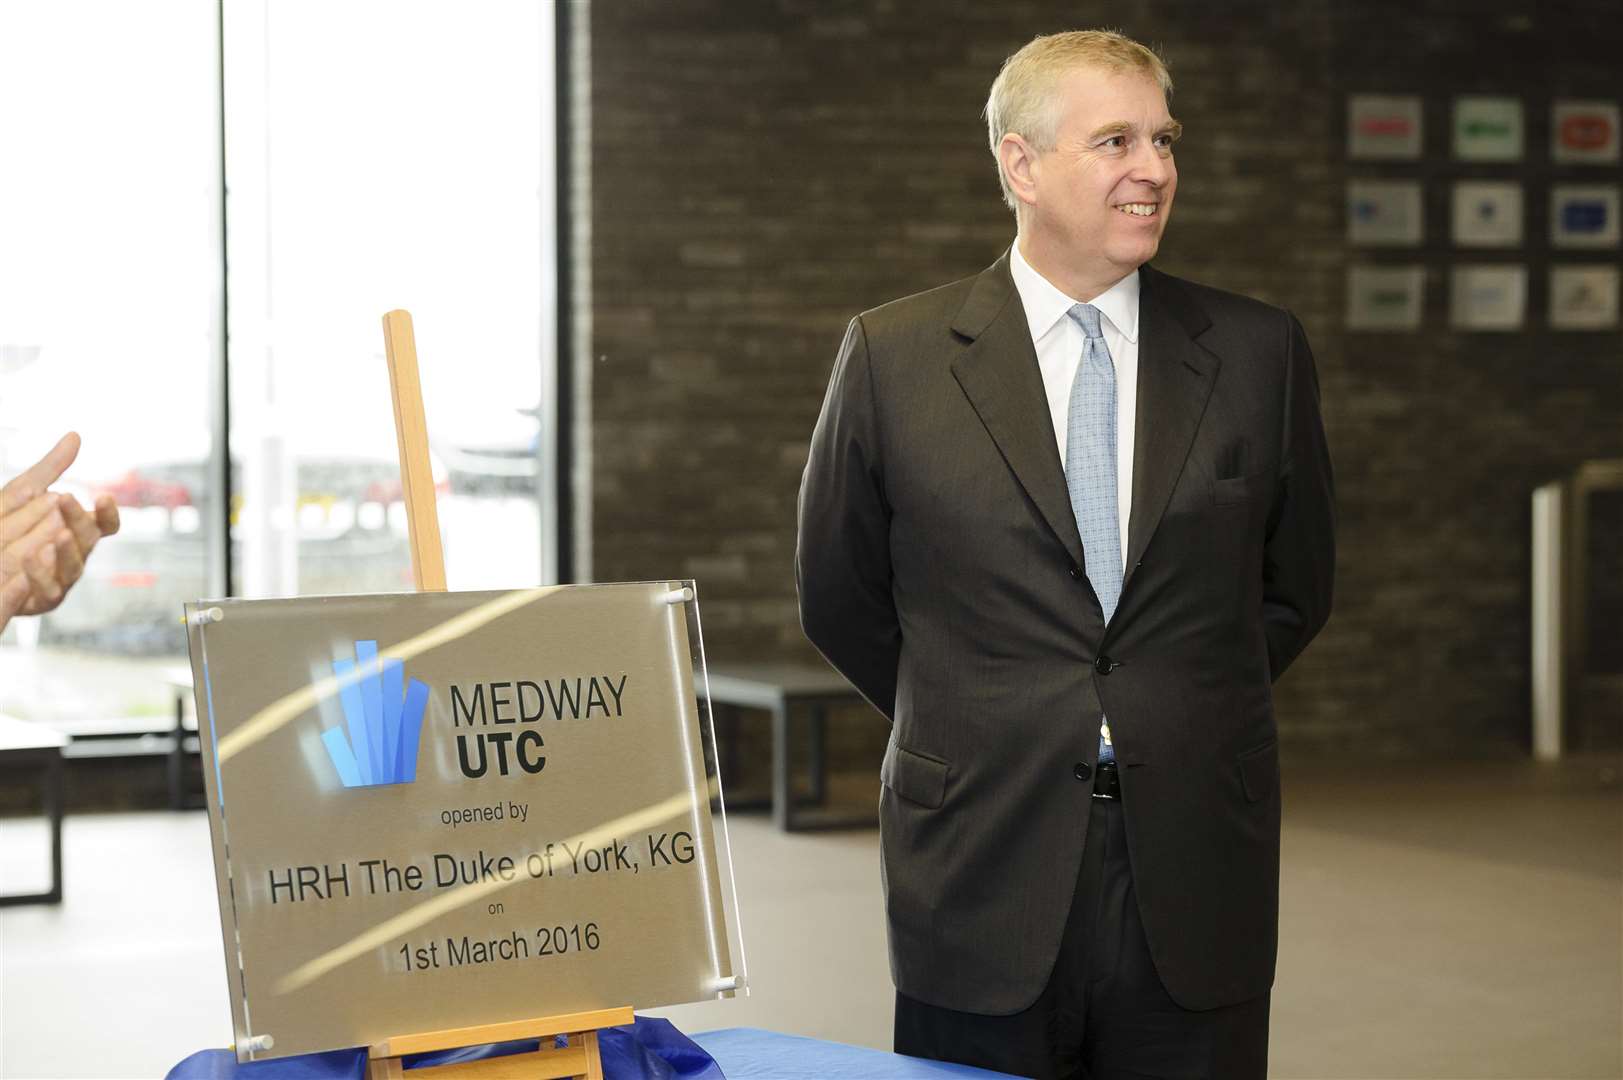 HRH the Duke of York at the official opening of the Medway UTC